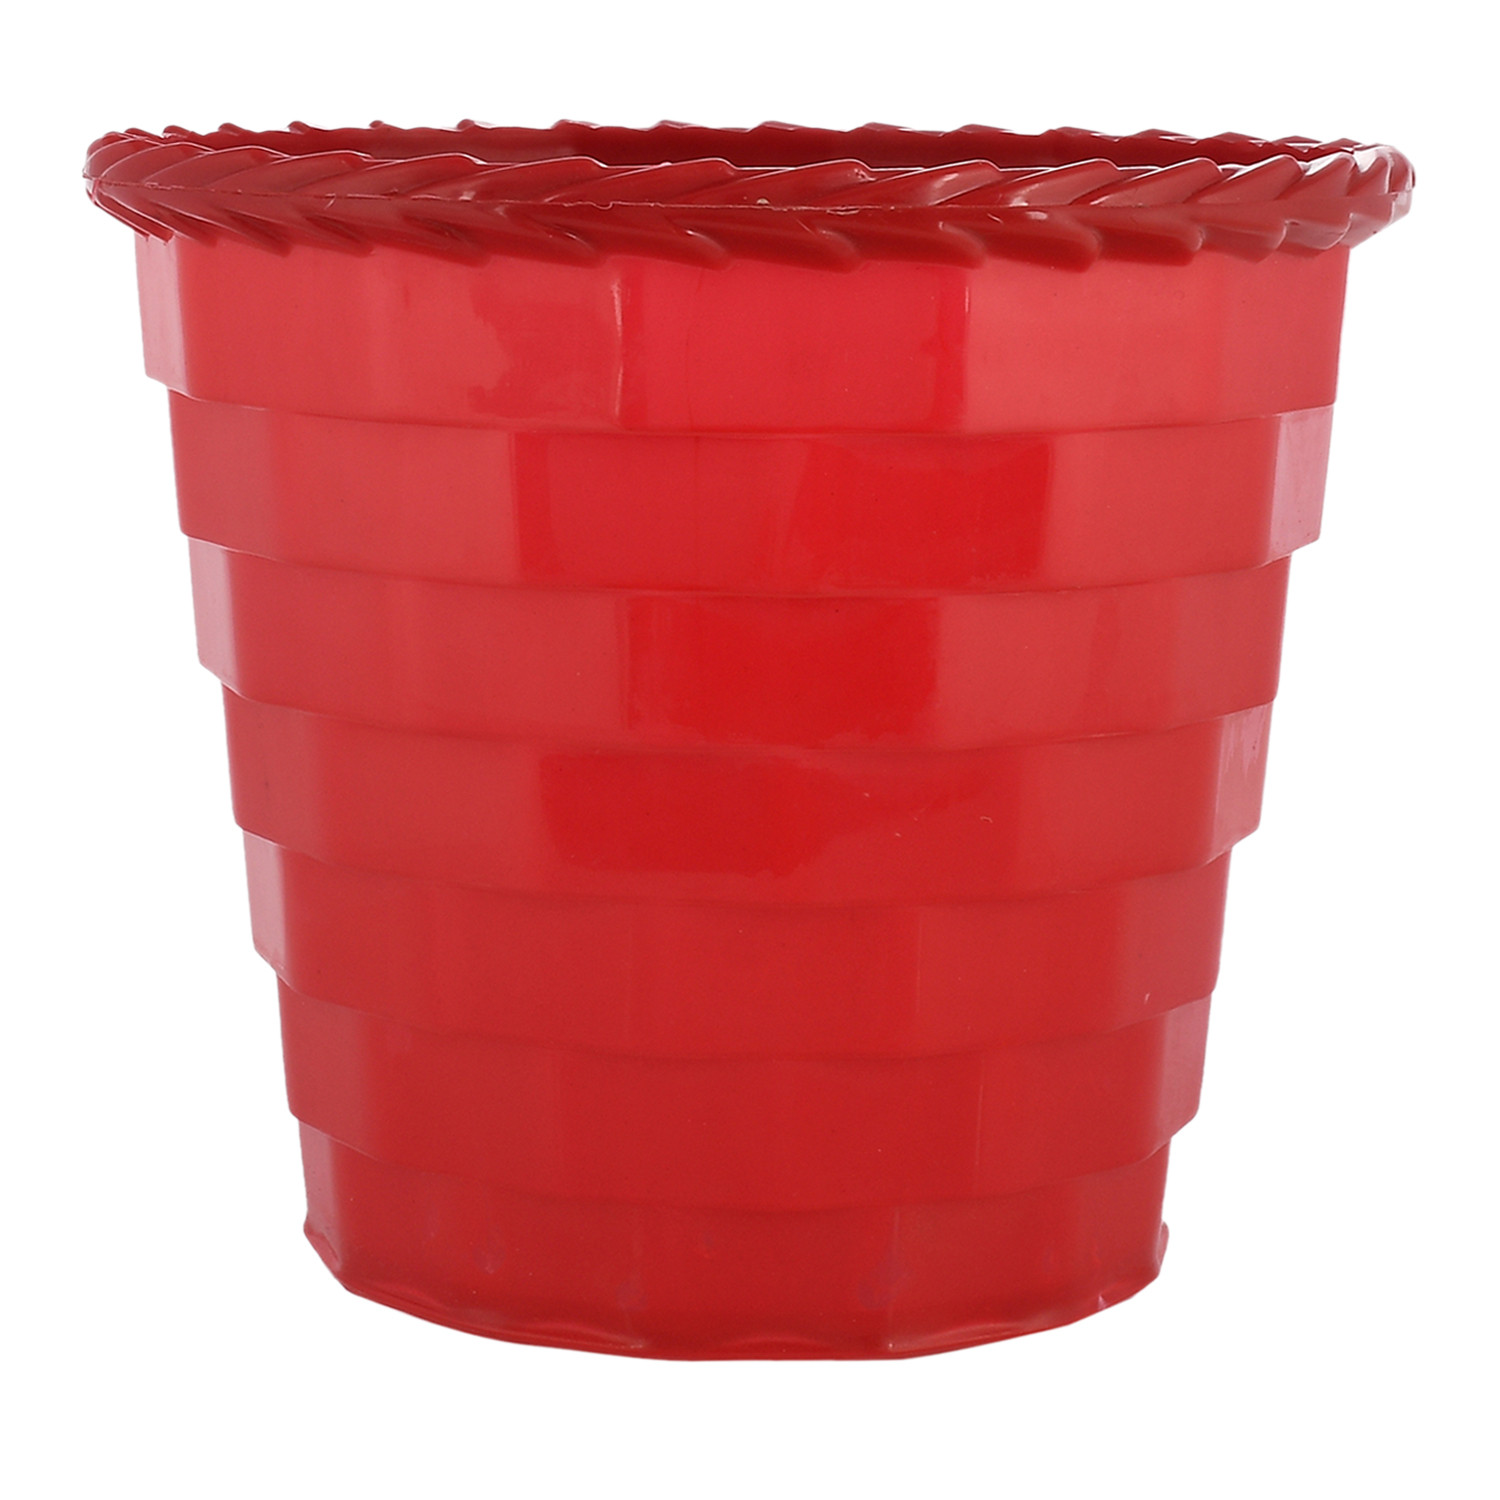 Kuber Industries Brick Flower Pot|Durable Plastic Flower Pots|Planters for Home Décor|Garden|Living Room|Balcony|8 Inch|Pack of 2 (Red & Maroon)